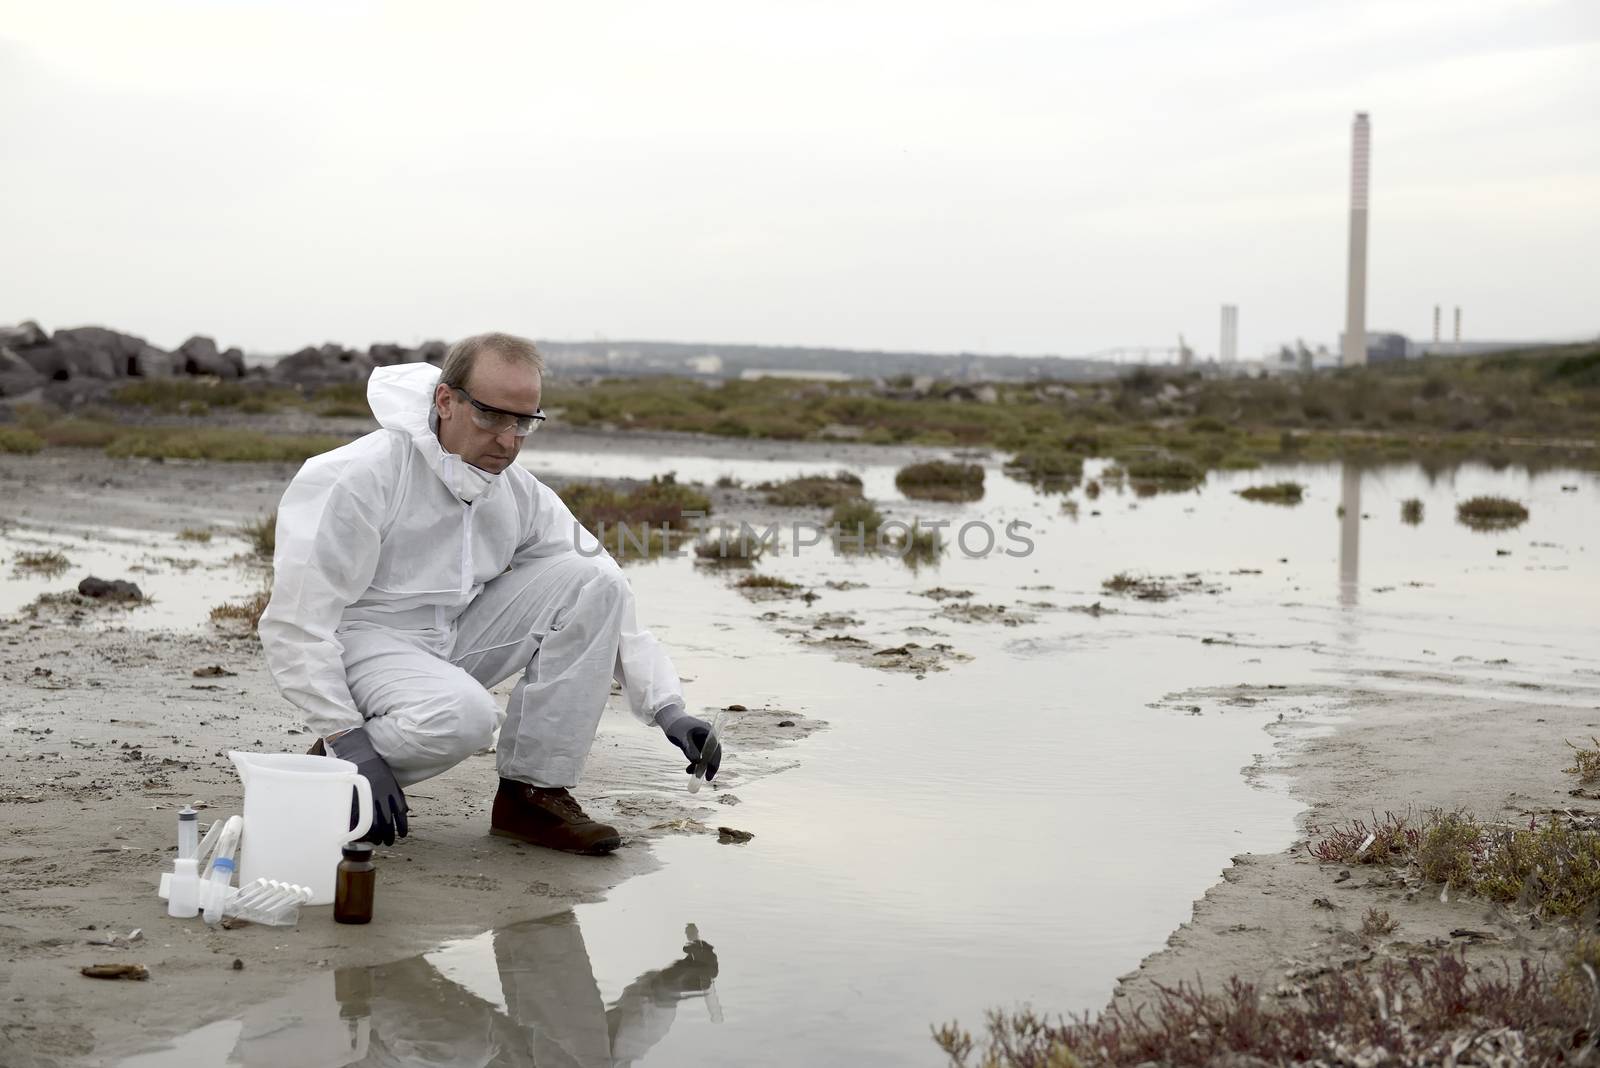 Worker in a protective suit examining pollution by osmar01